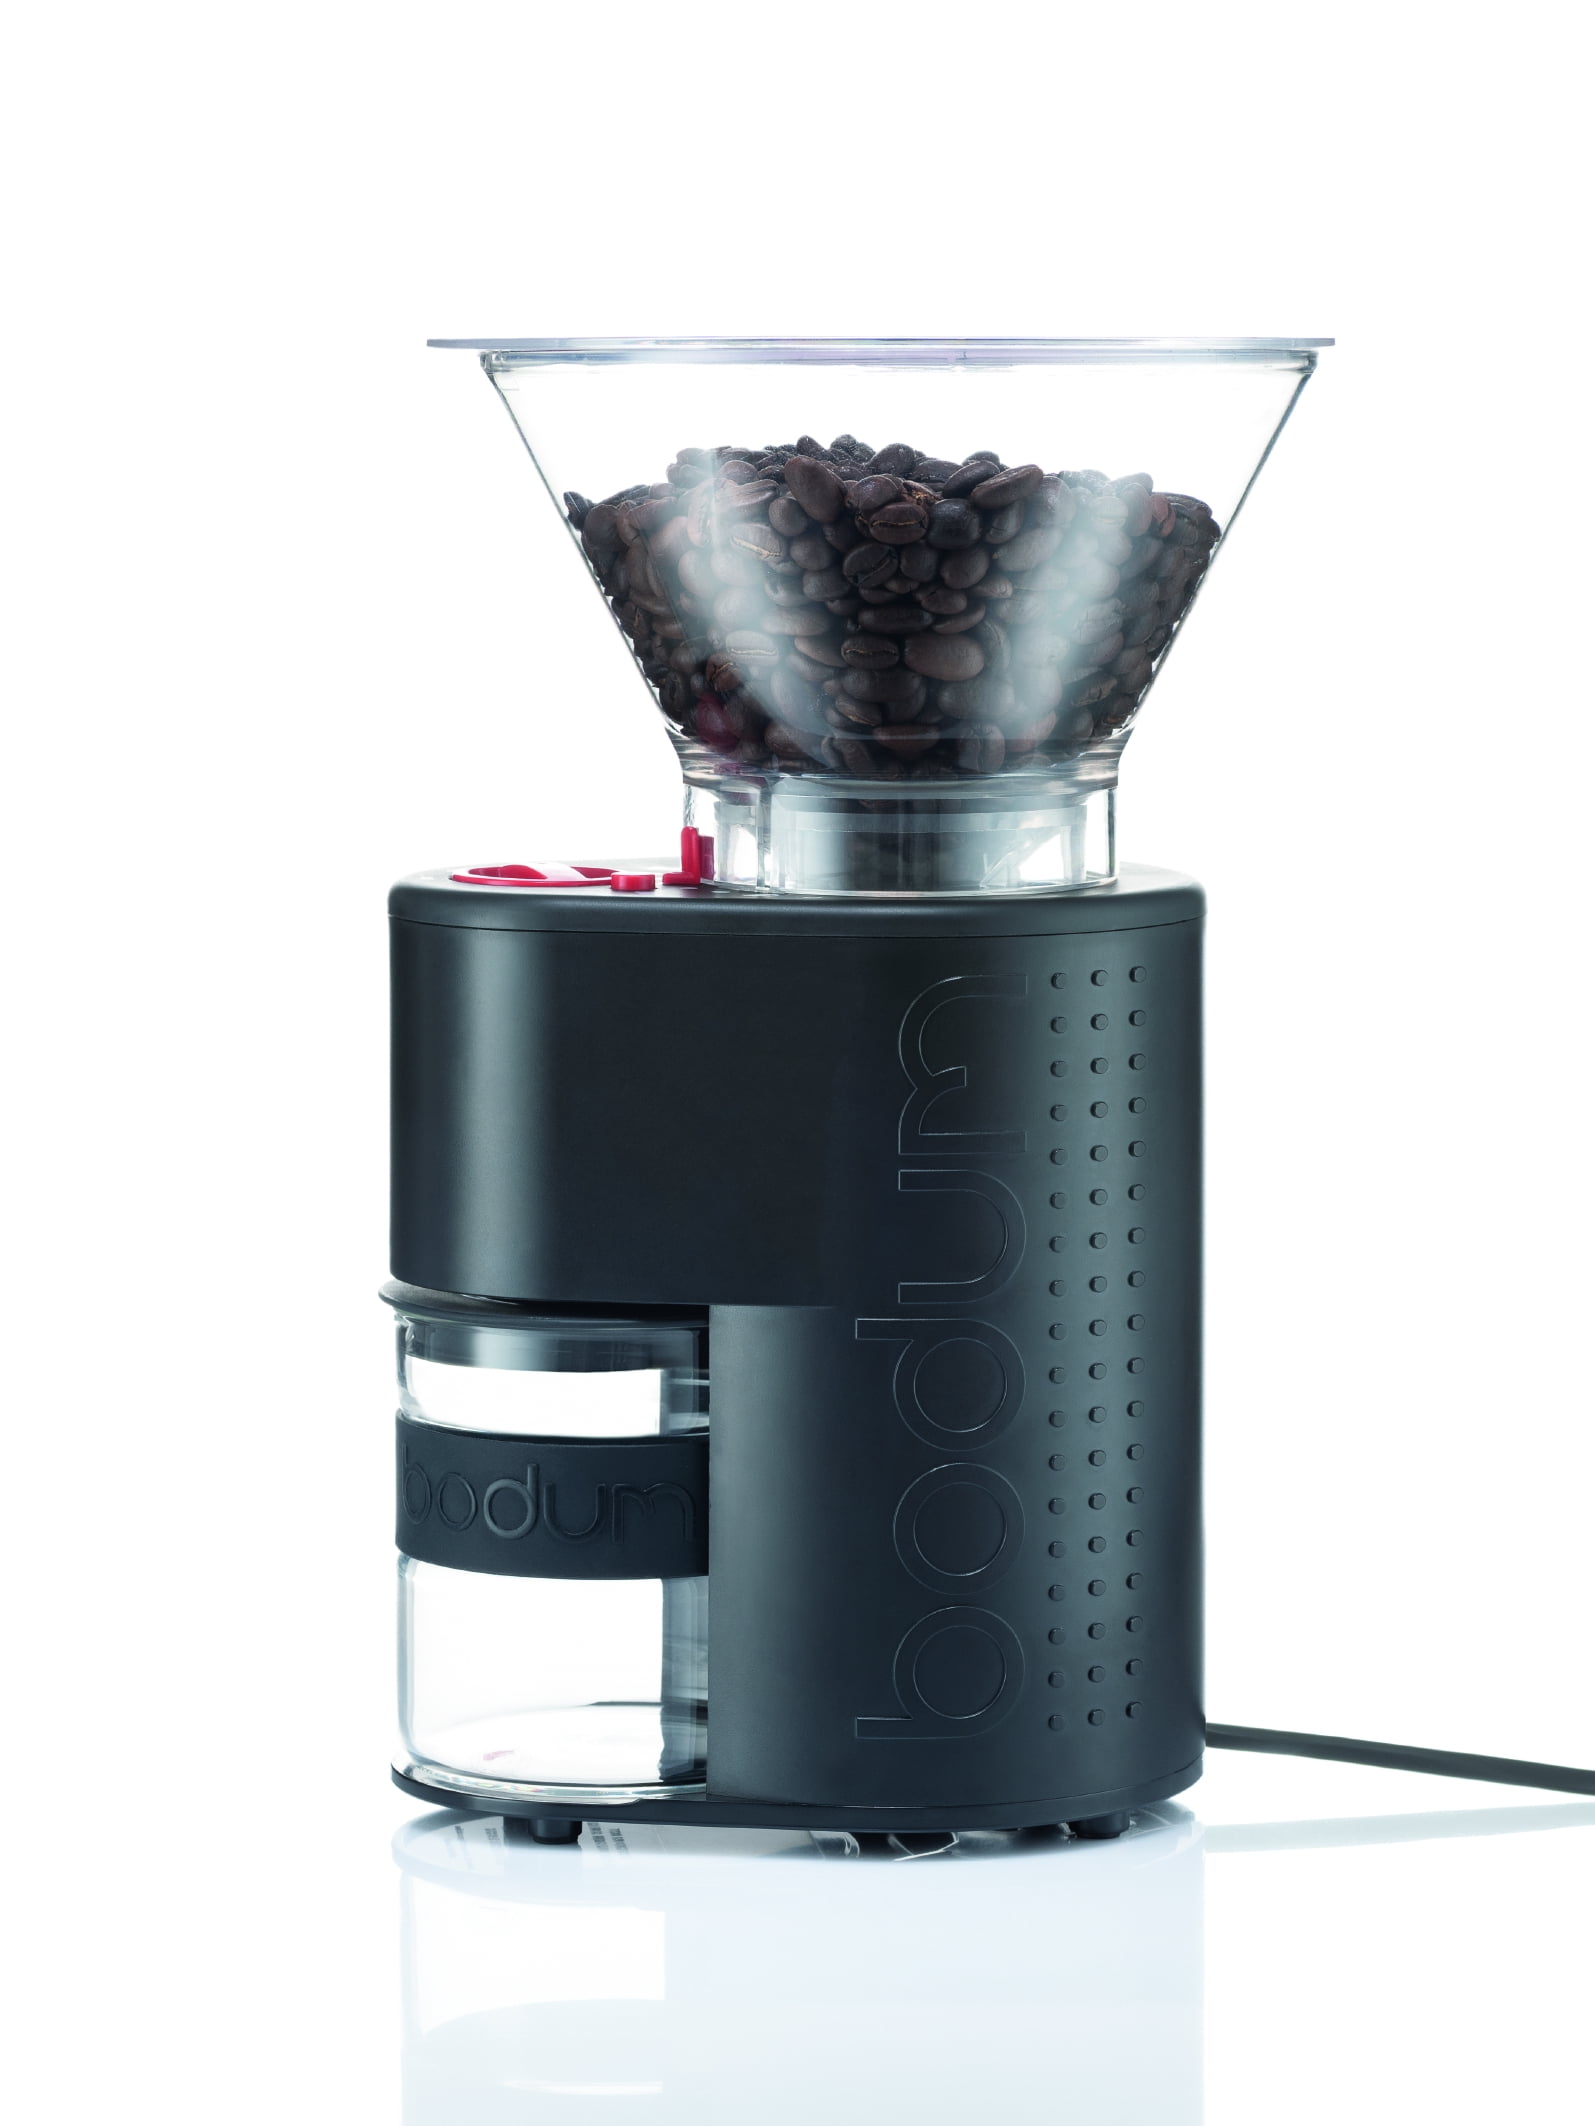 BONSENKITCHEN Electric Burr Coffee Grinder Large CG8901 - Stainless St –